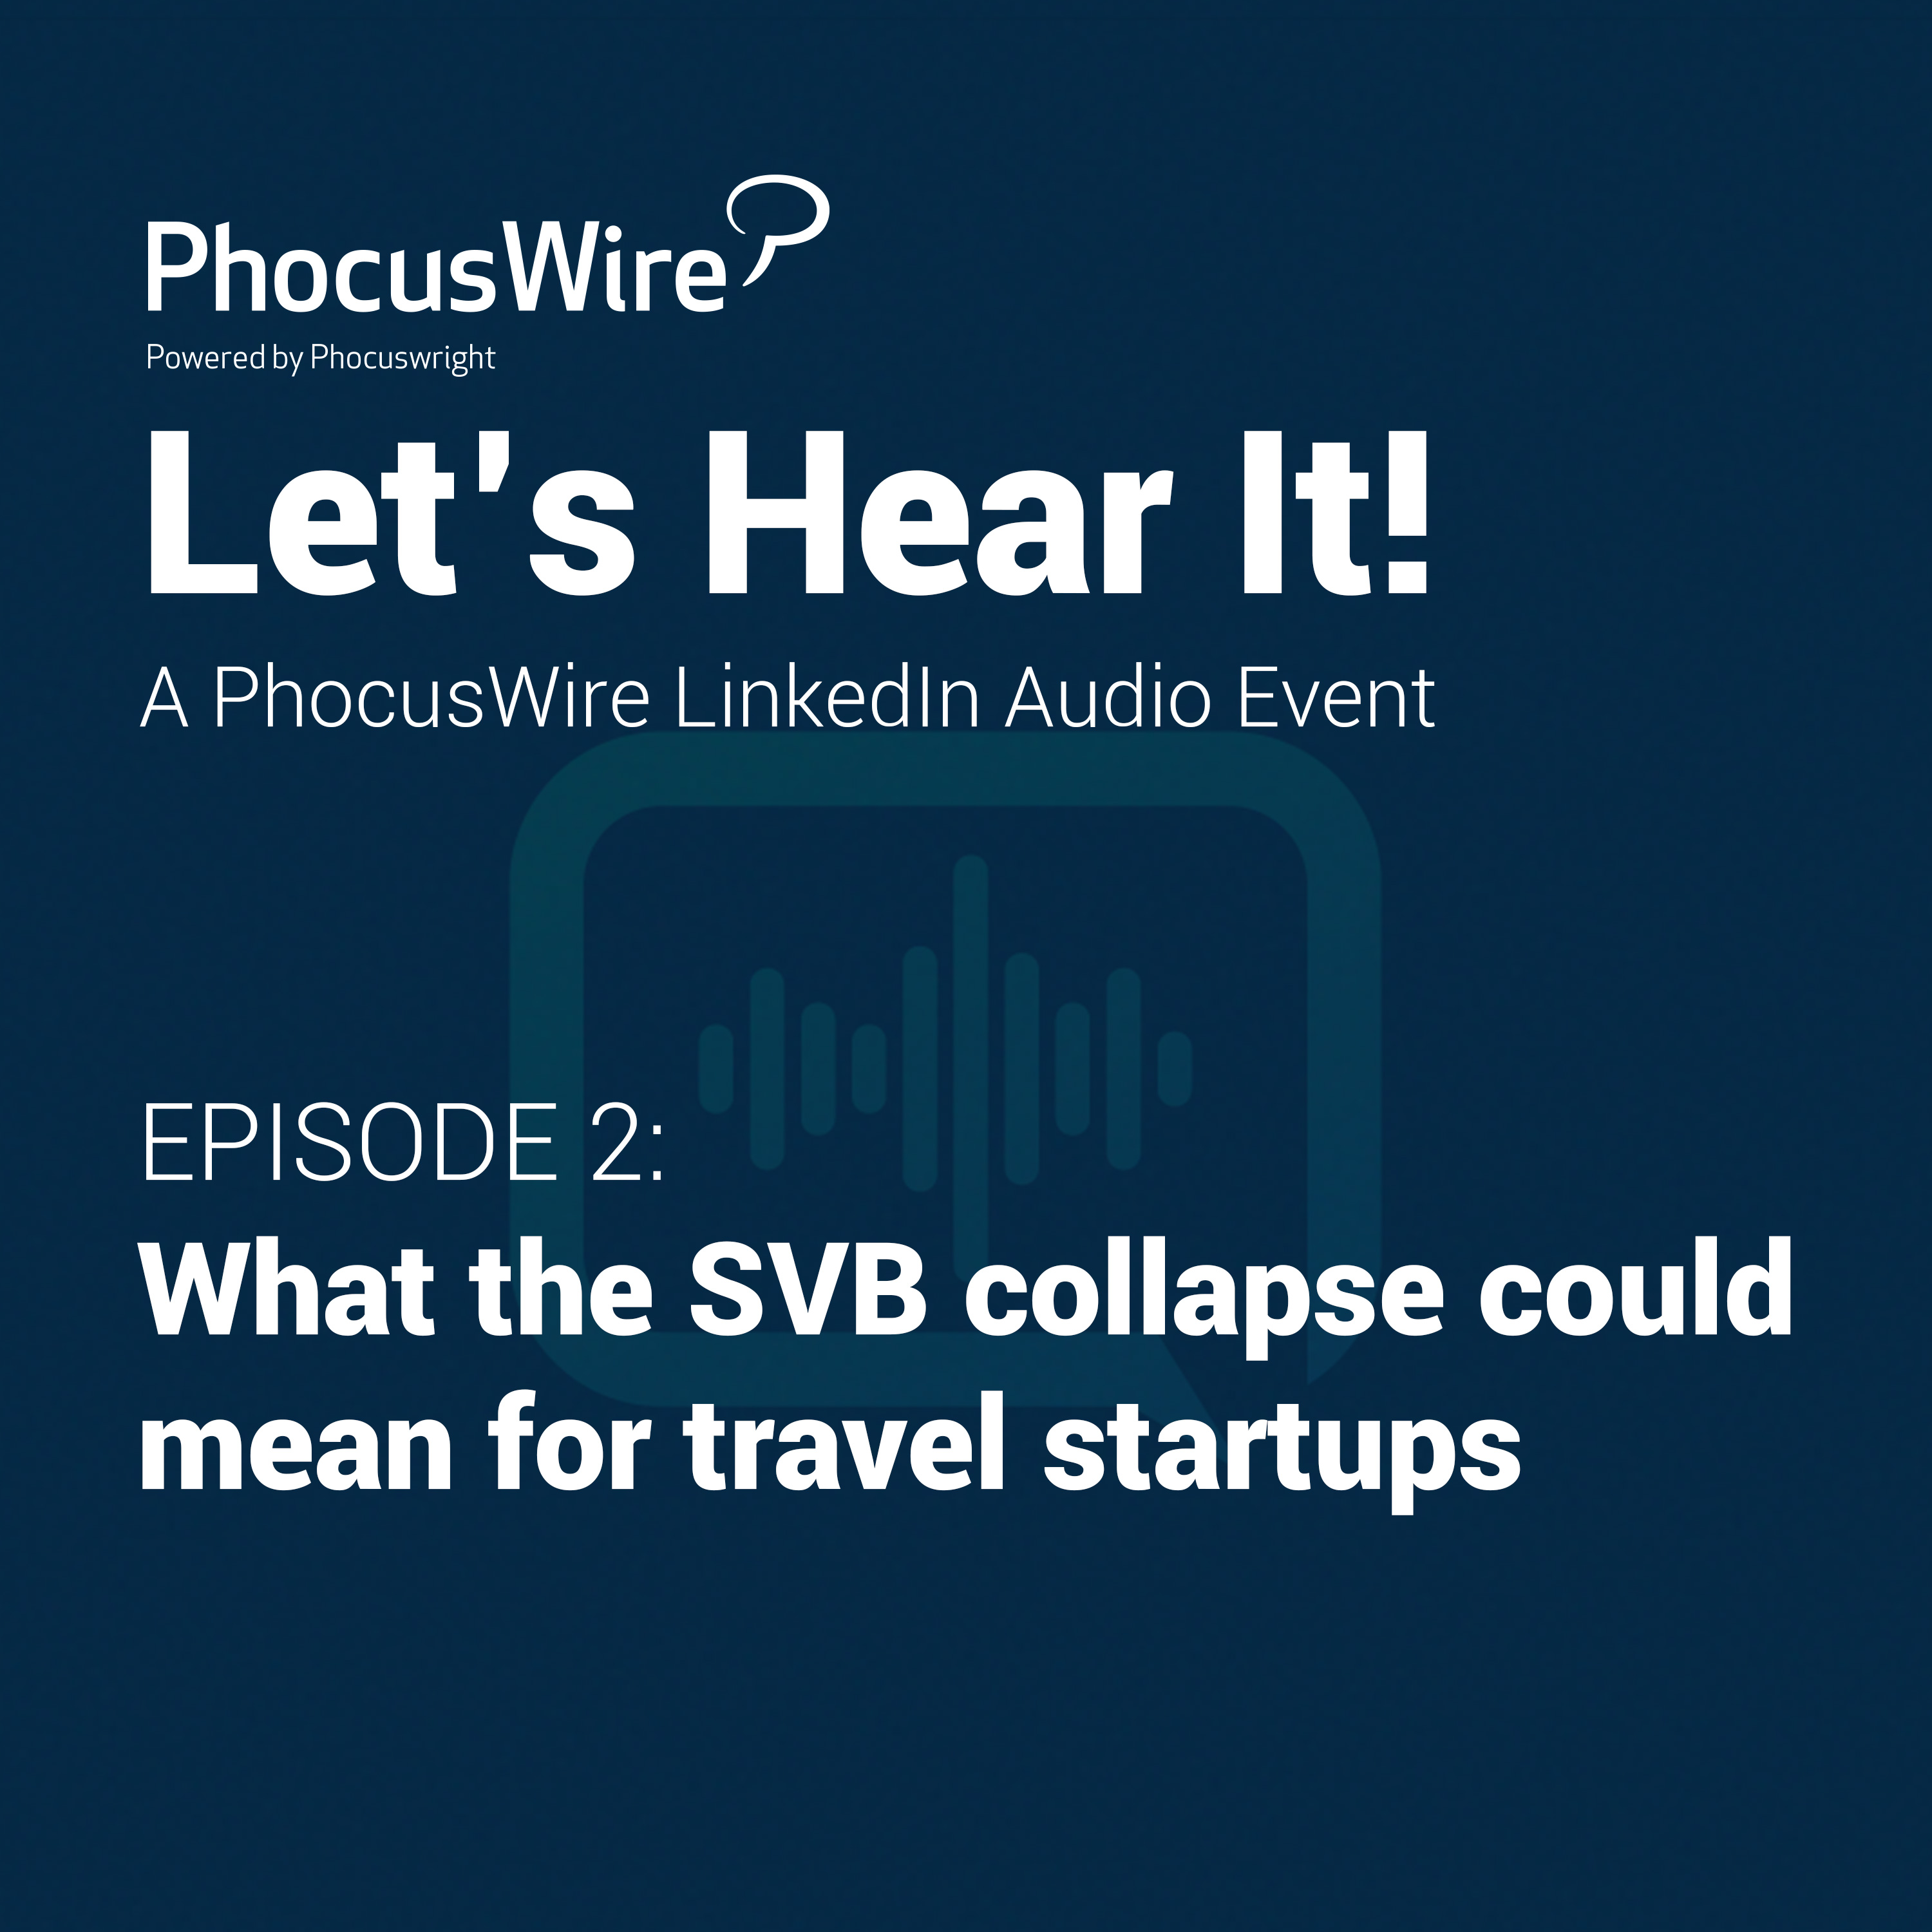 What the SVB collapse could mean for travel startups